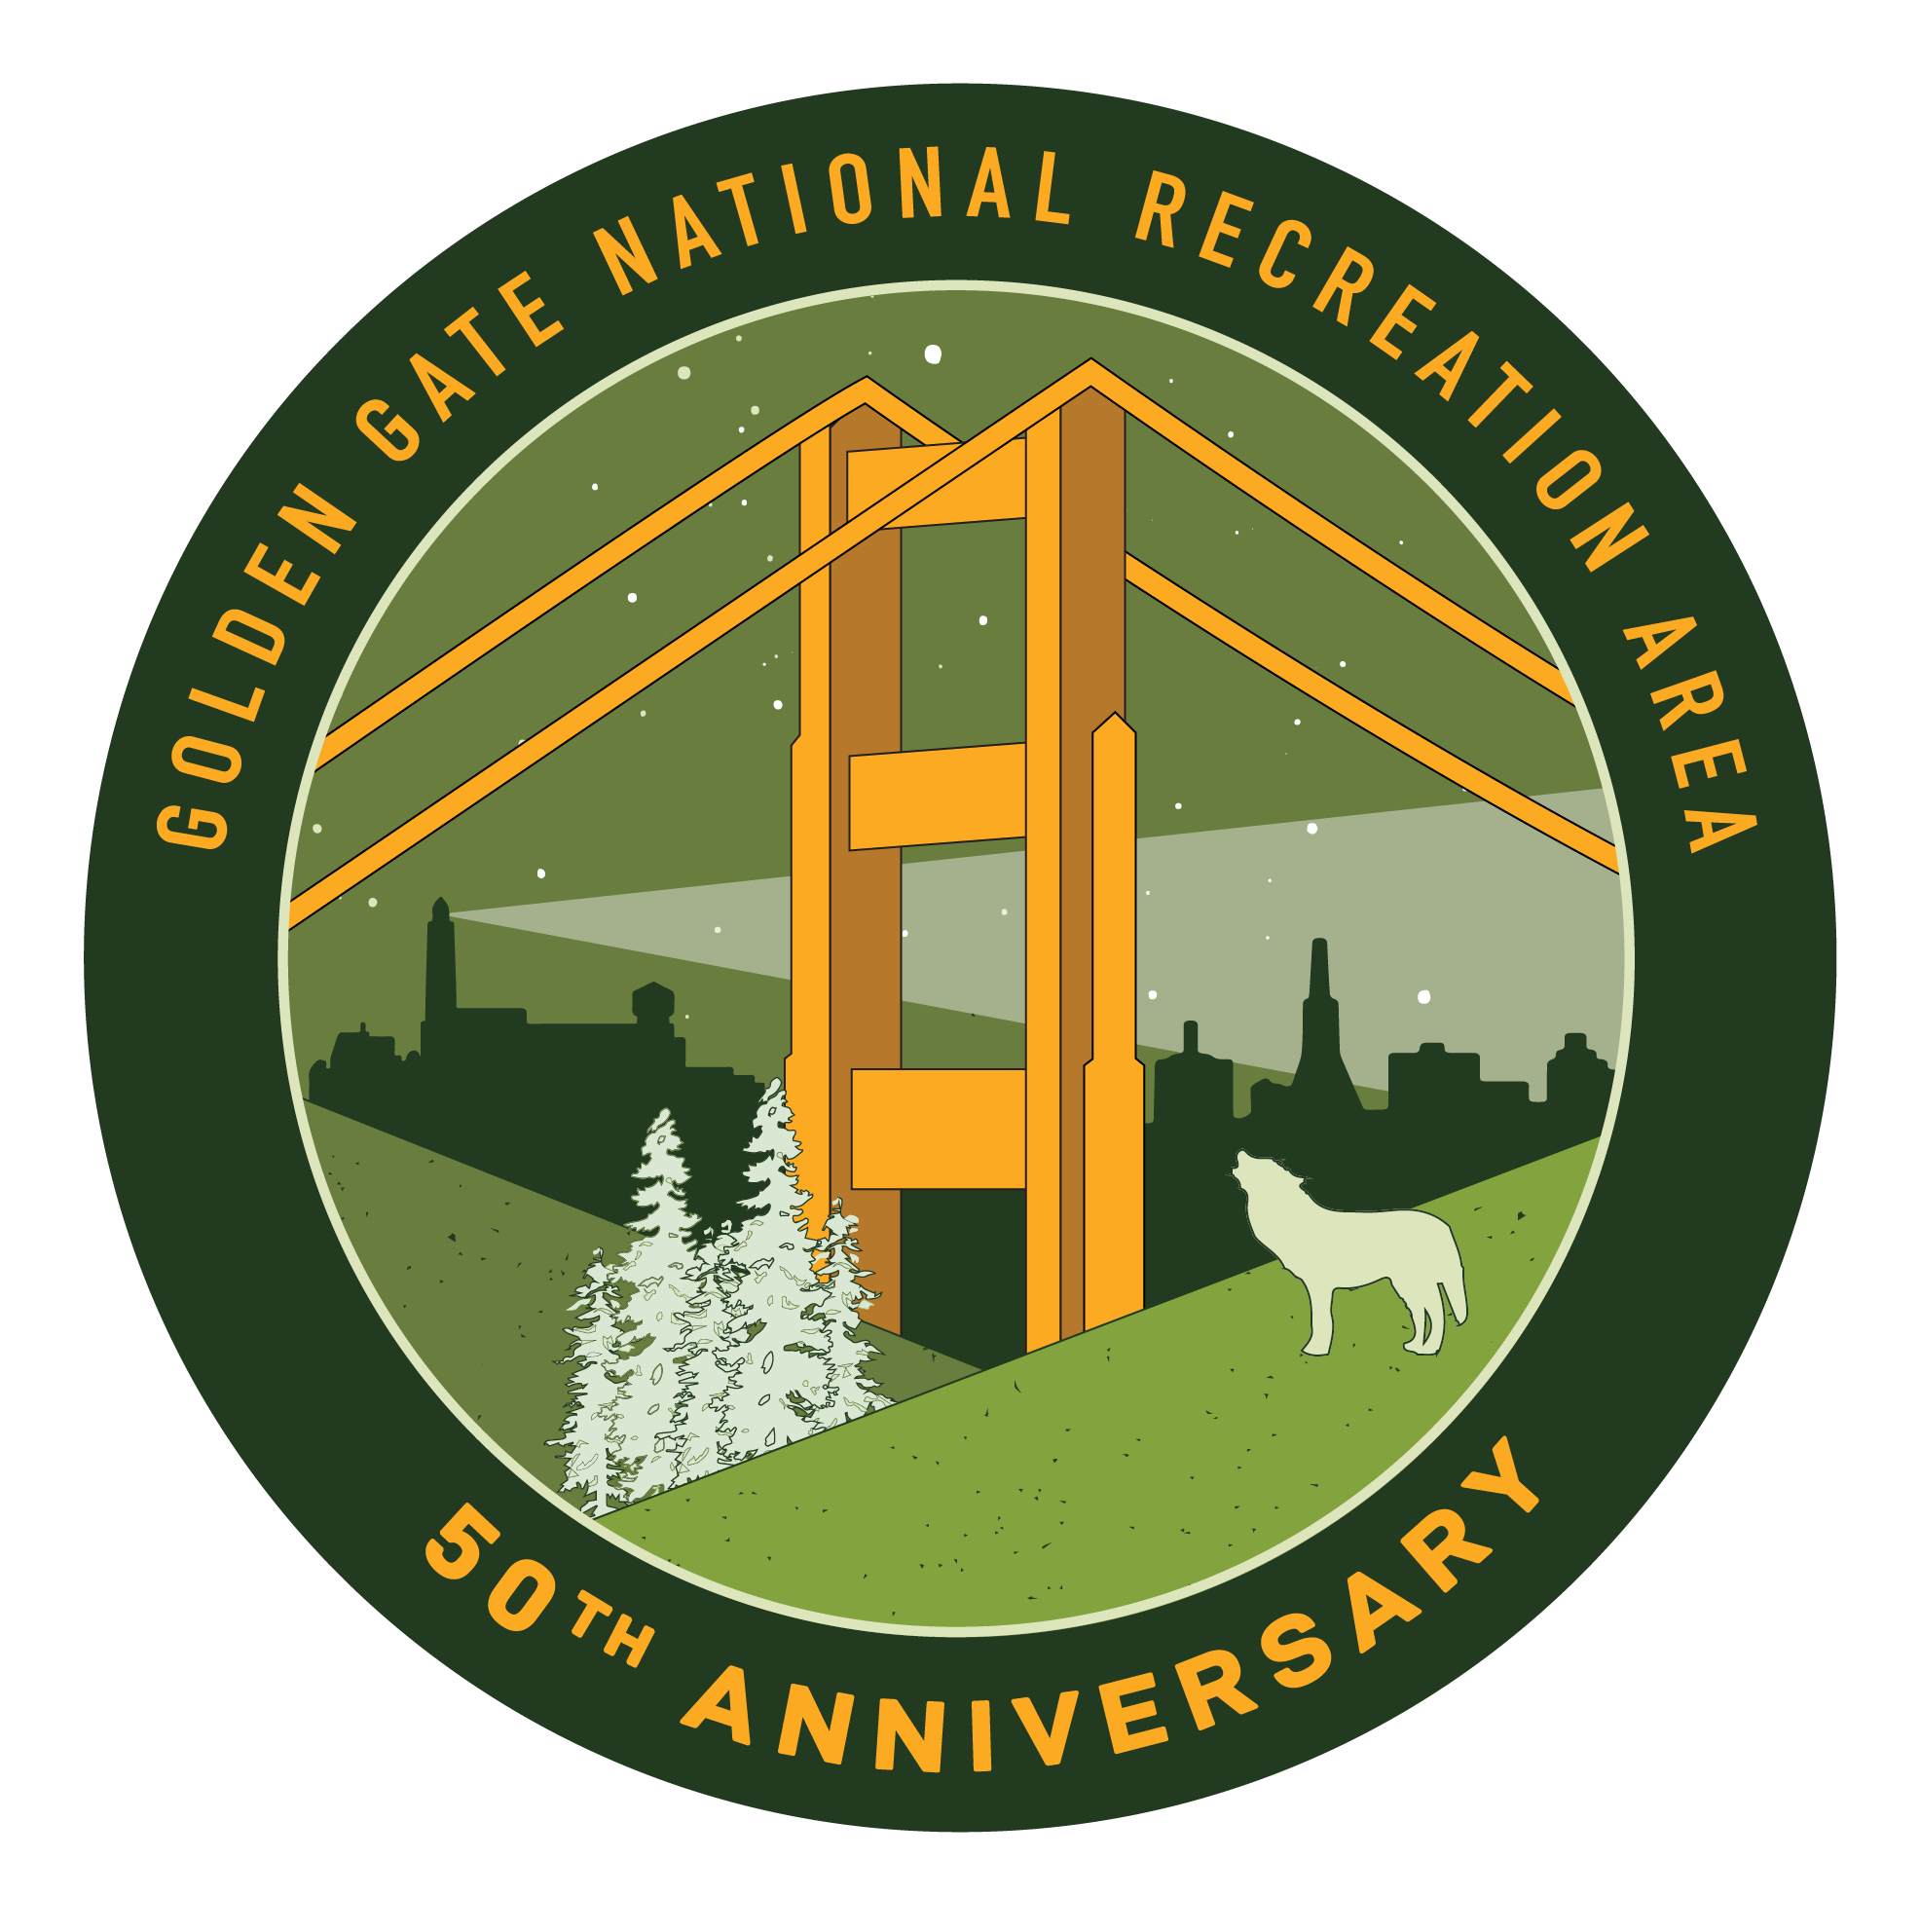 Golden Gate National Recreation Area 50th Anniversary Logo- a wolf howling near coniferous trees in the foreground, top of suspension bridge in front of a city-scape starry night background.